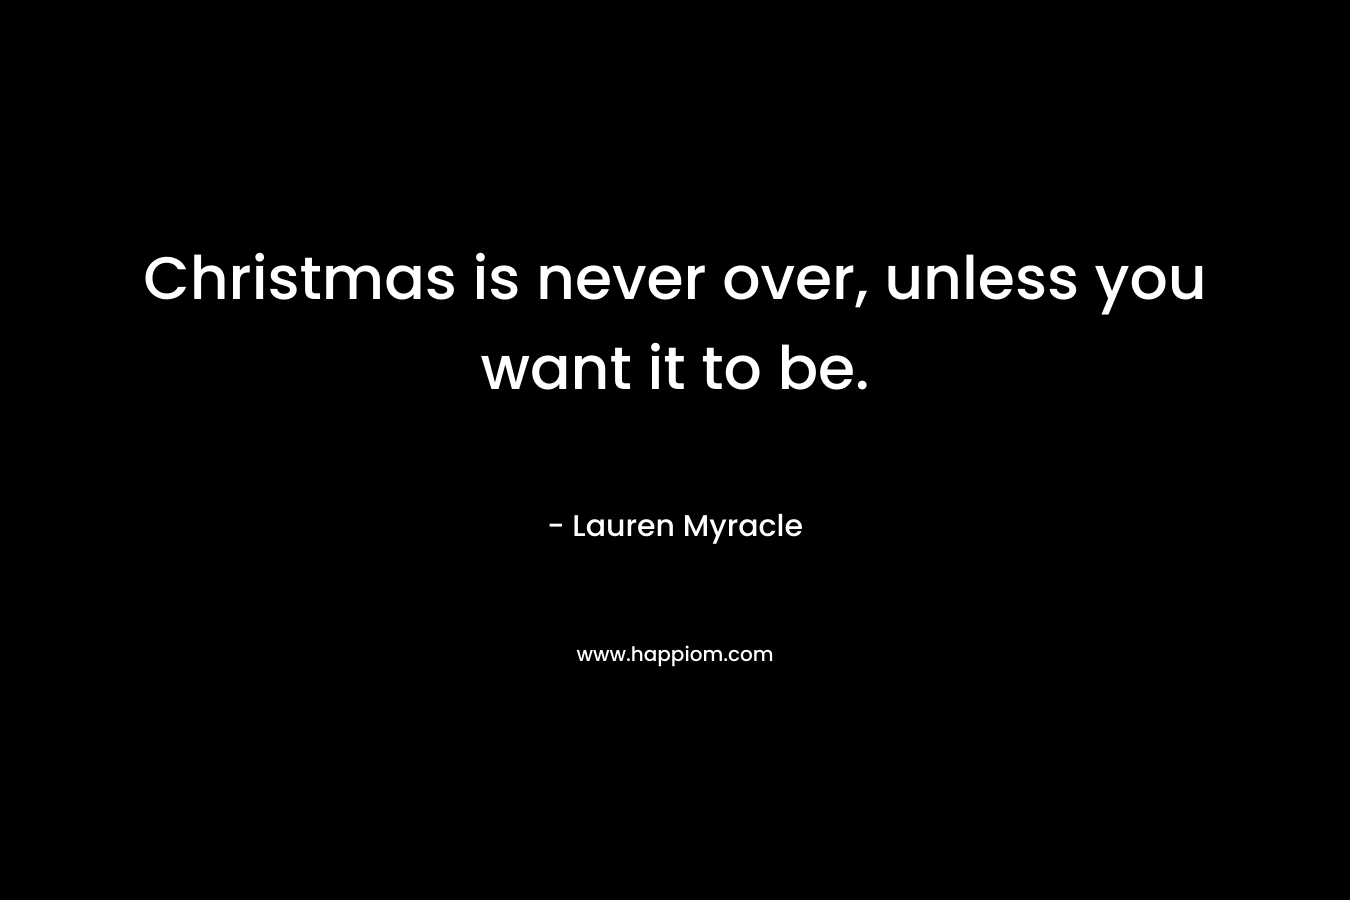 Christmas is never over, unless you want it to be. – Lauren Myracle